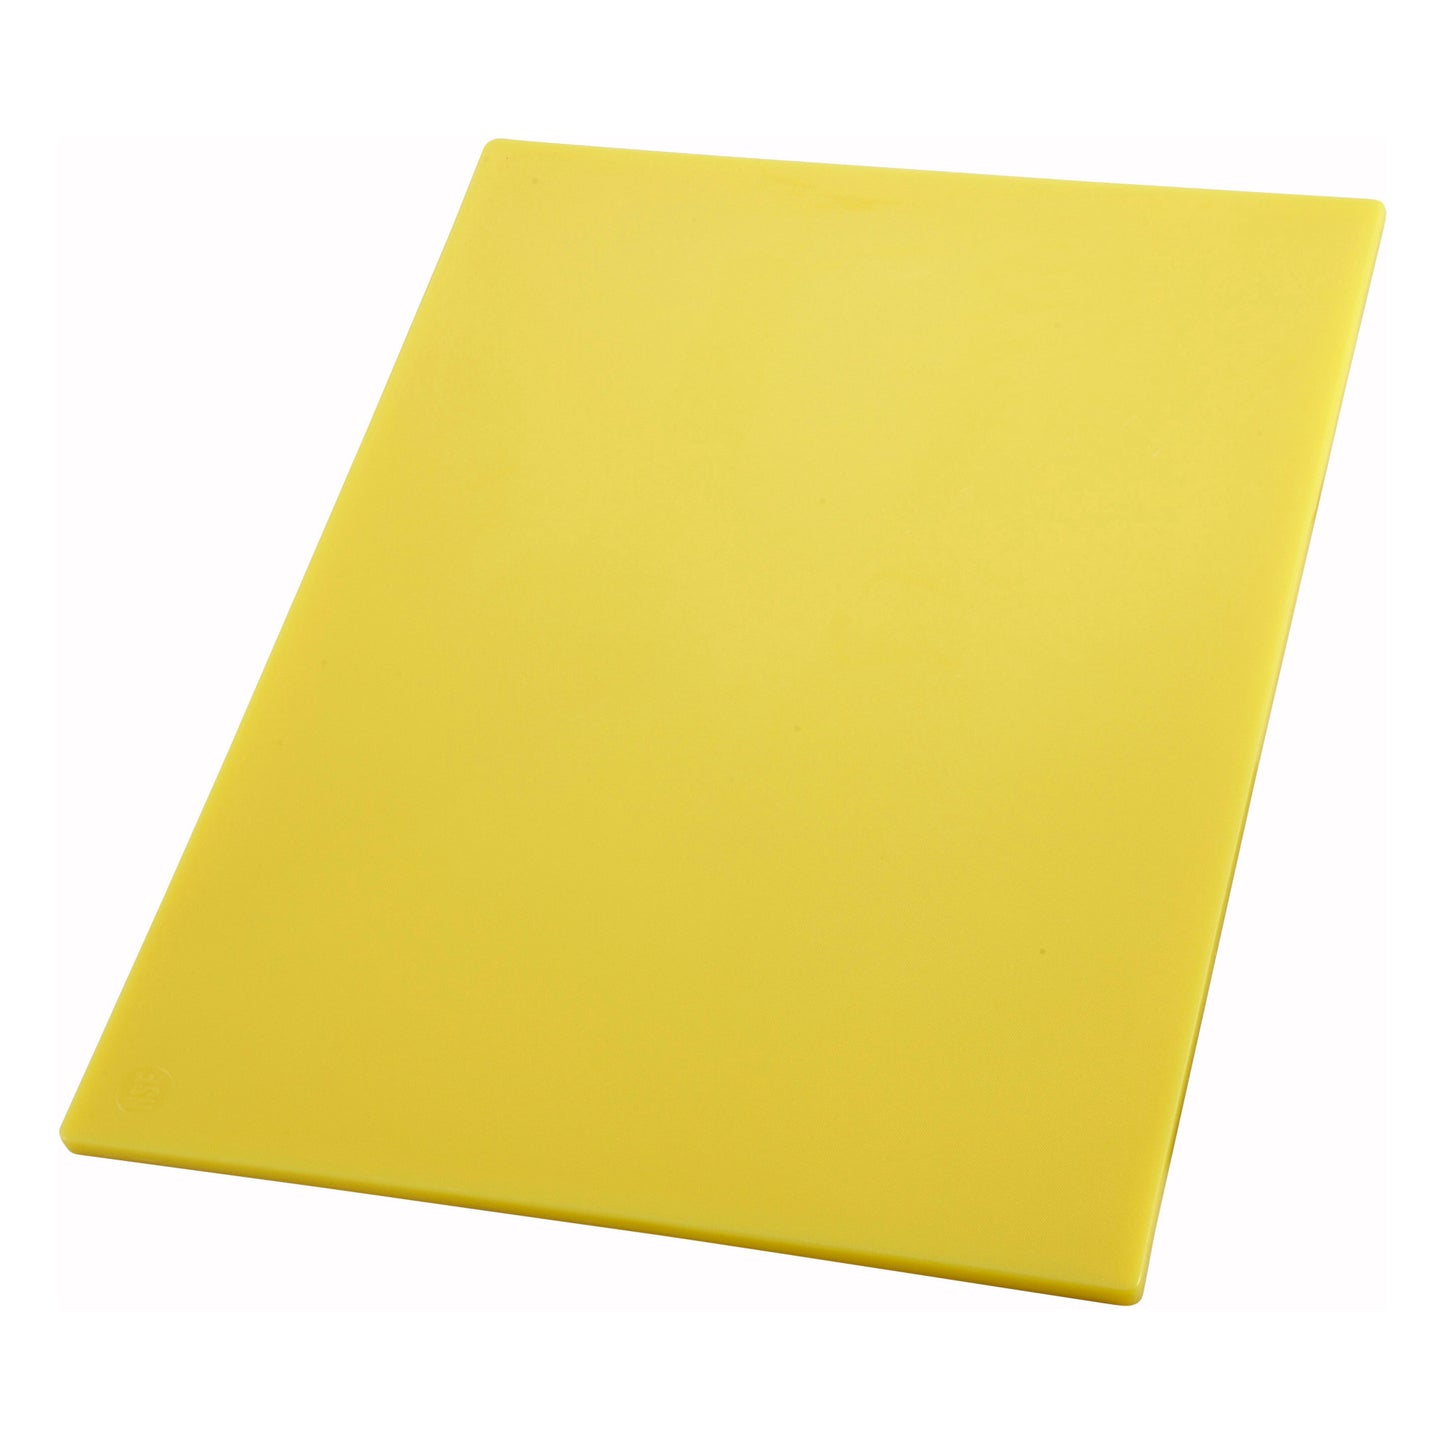 CBYL-1520 - HACCP Color-Coded Cutting Board - 15 x 20, Yellow